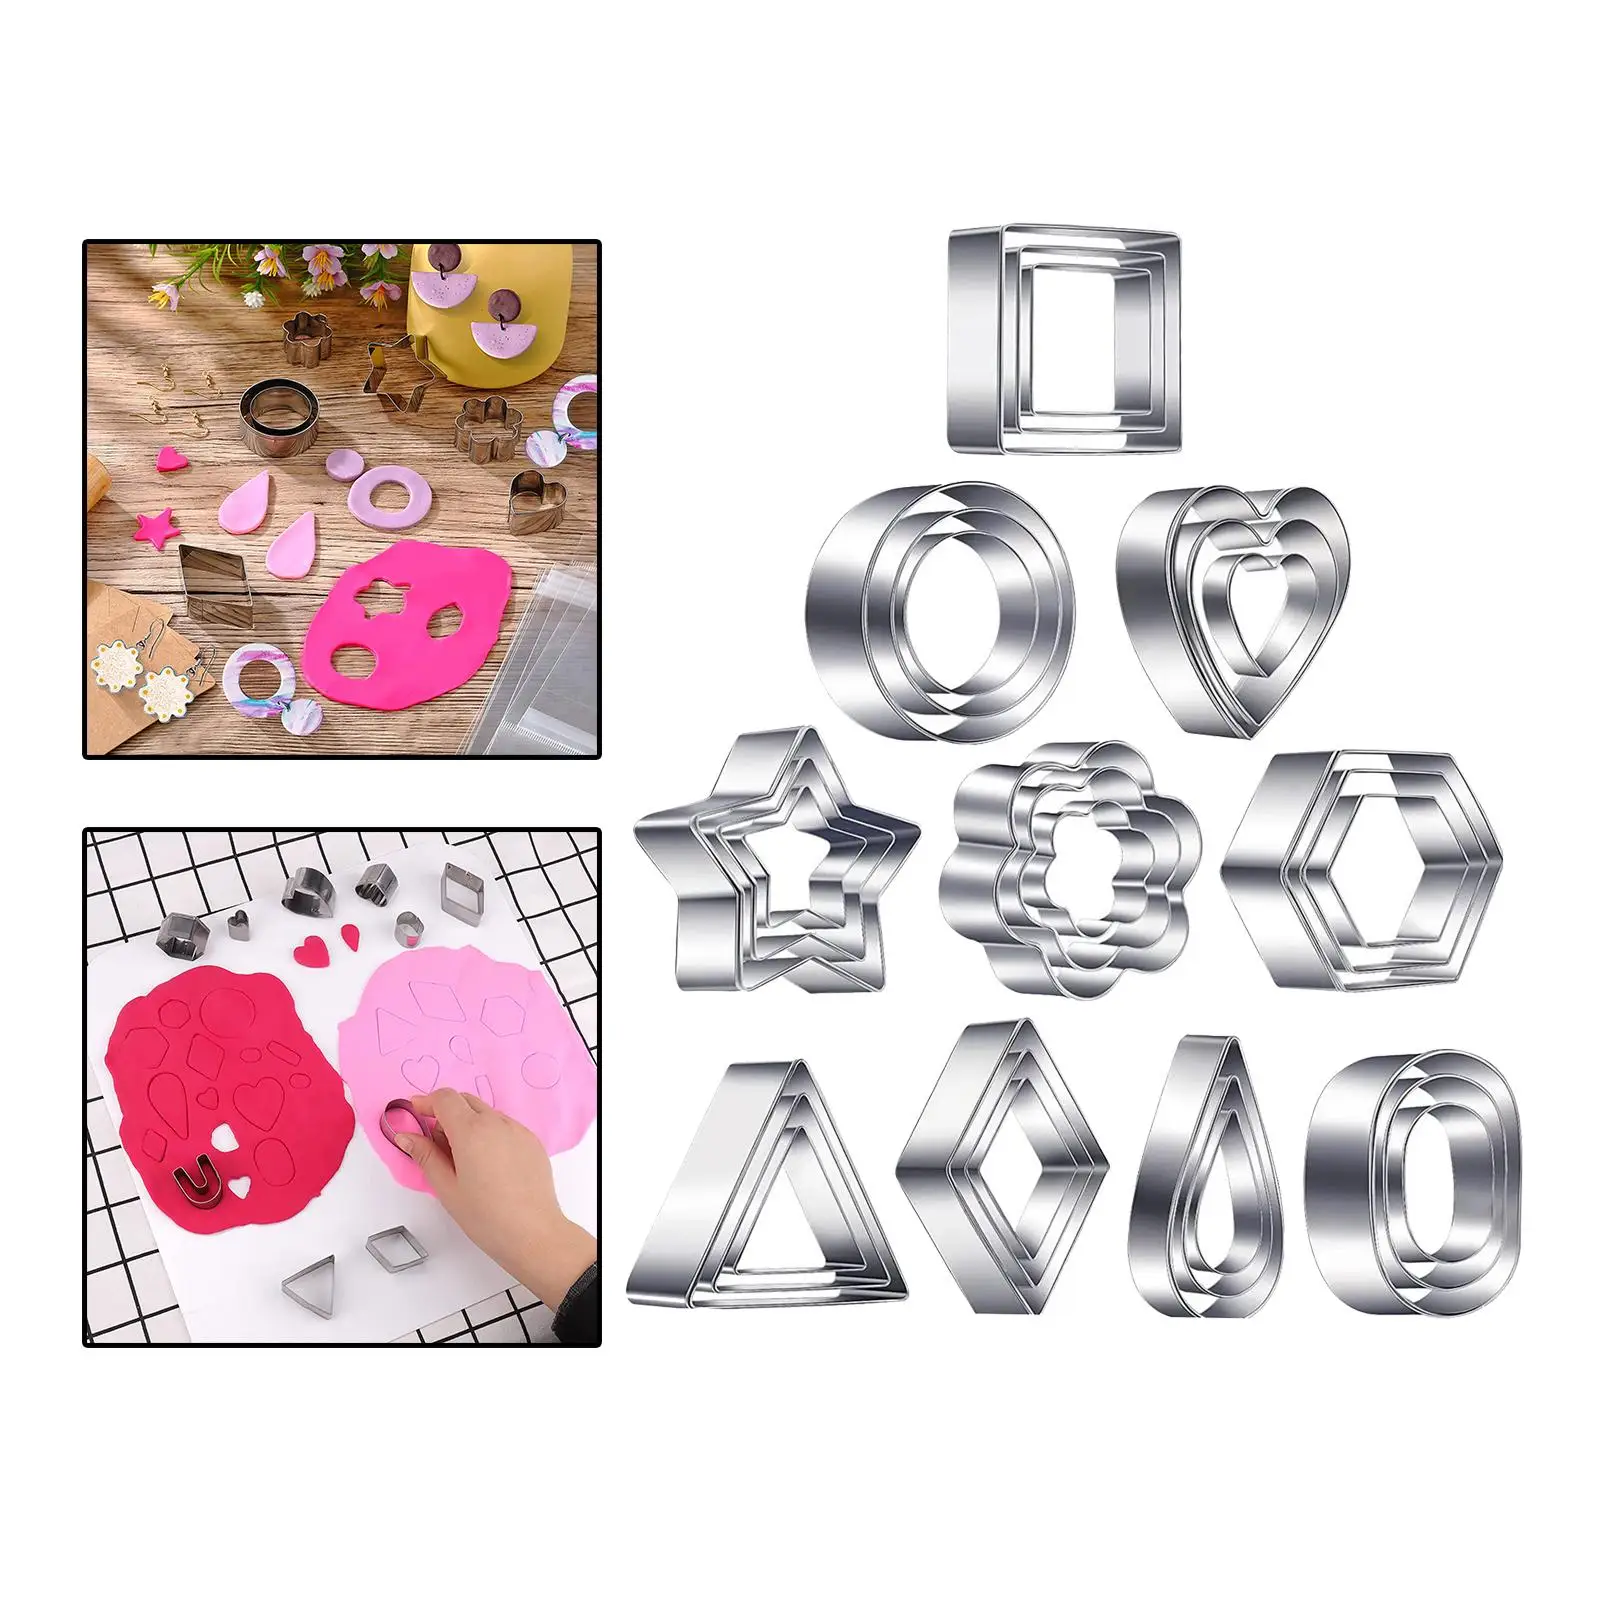 Handmade Polymer Clay Polymer  Punch  Cookie  Set  Supplies Stainless Steel for Jewelry Making Baking